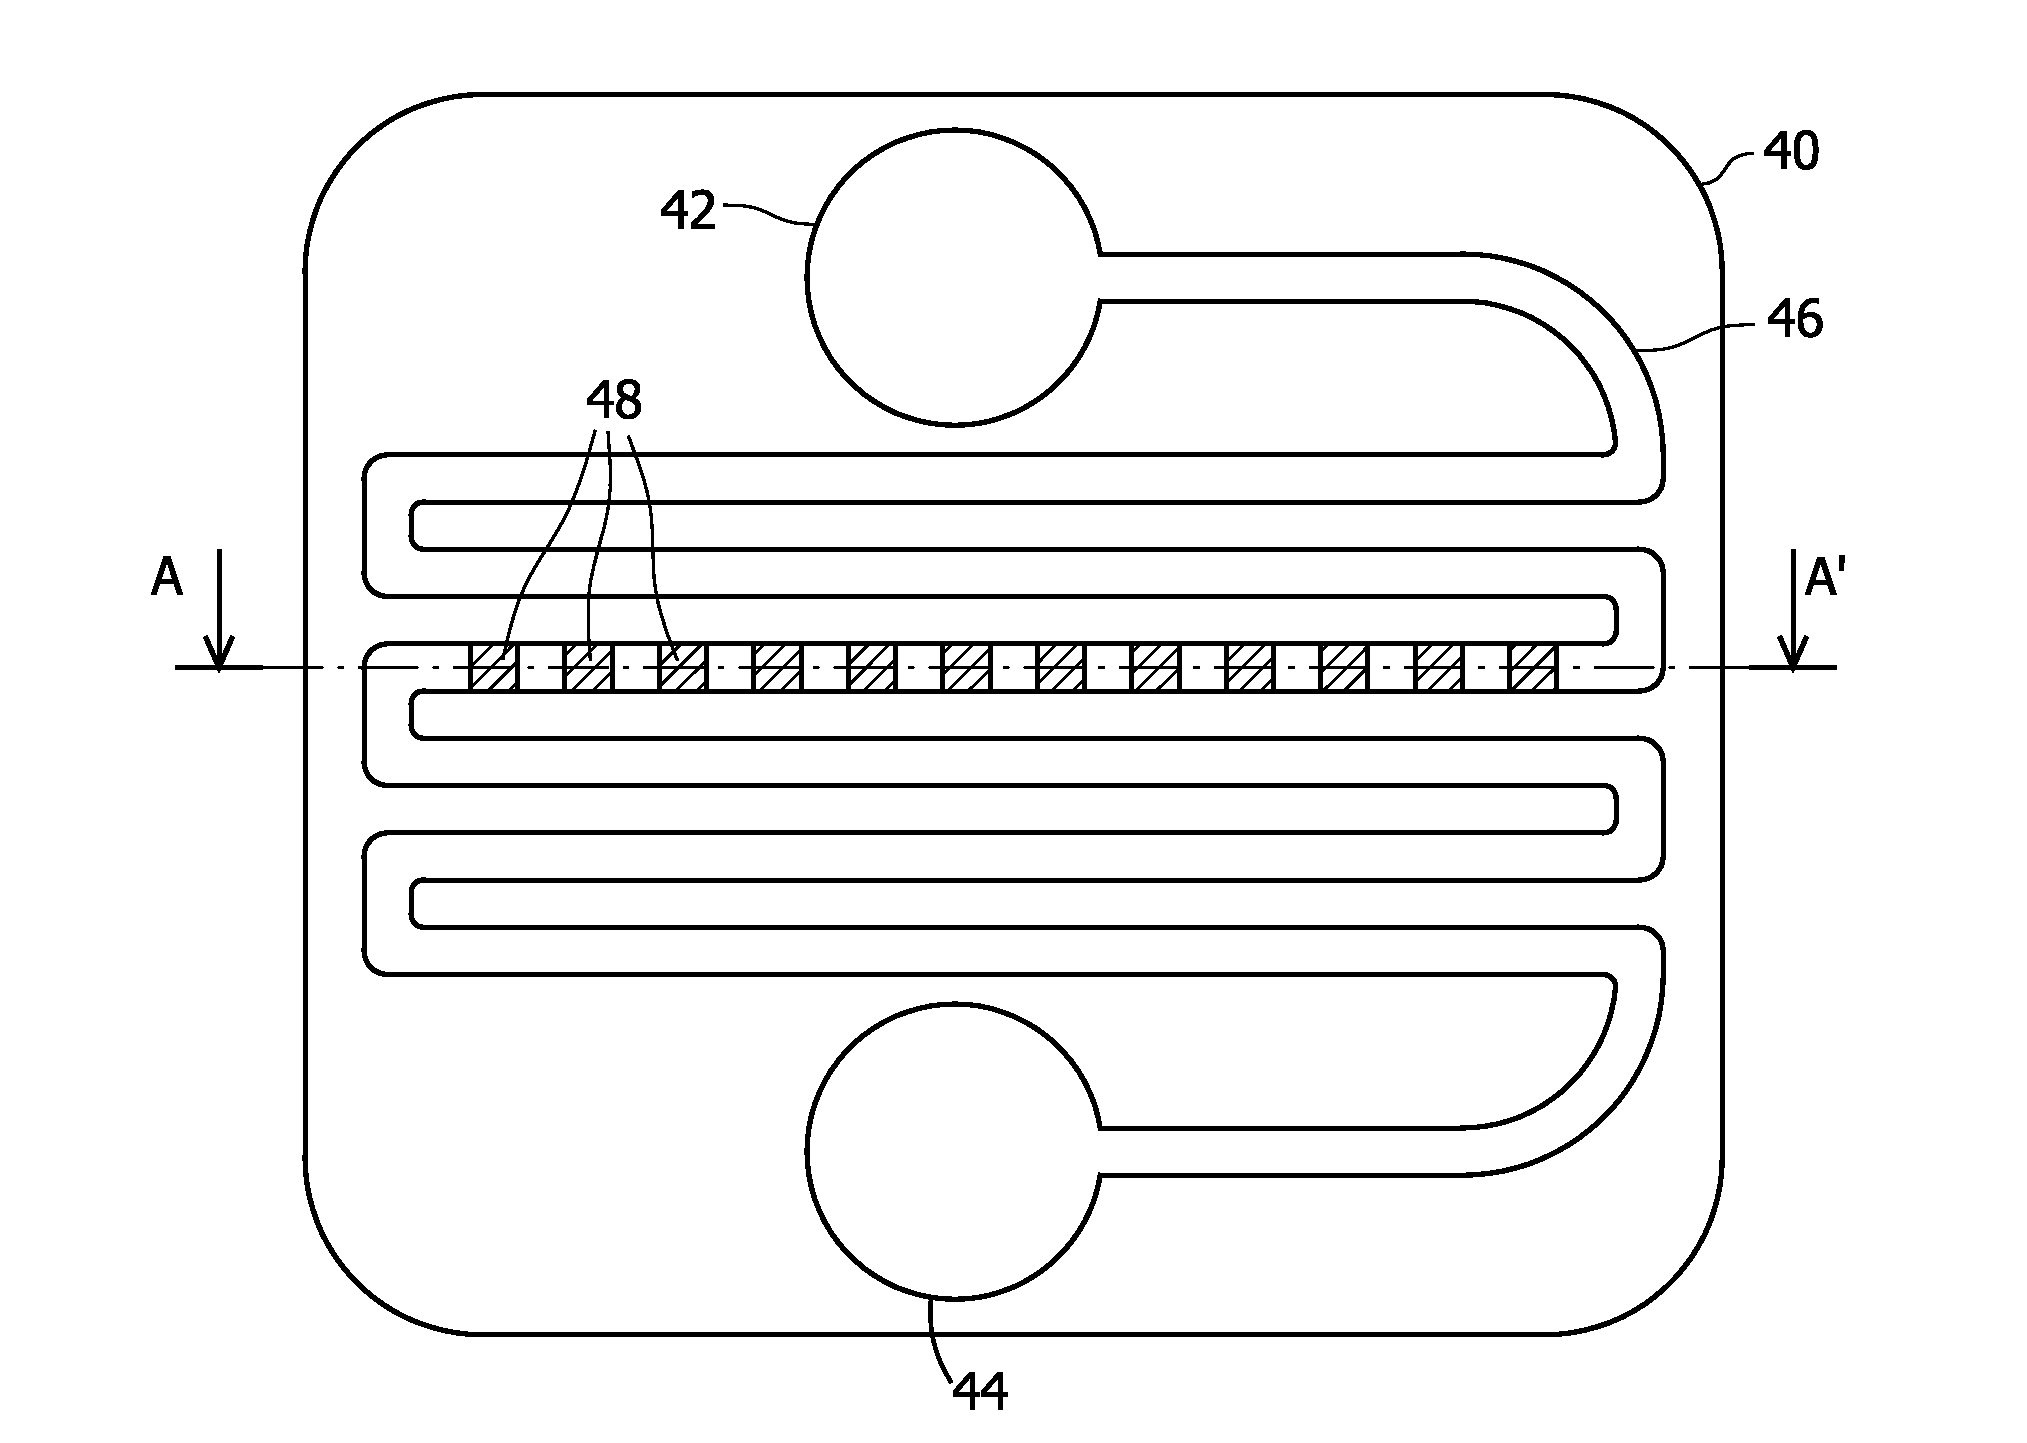 Microfluidic Device with Porous Membrane and an Unbranched Channel